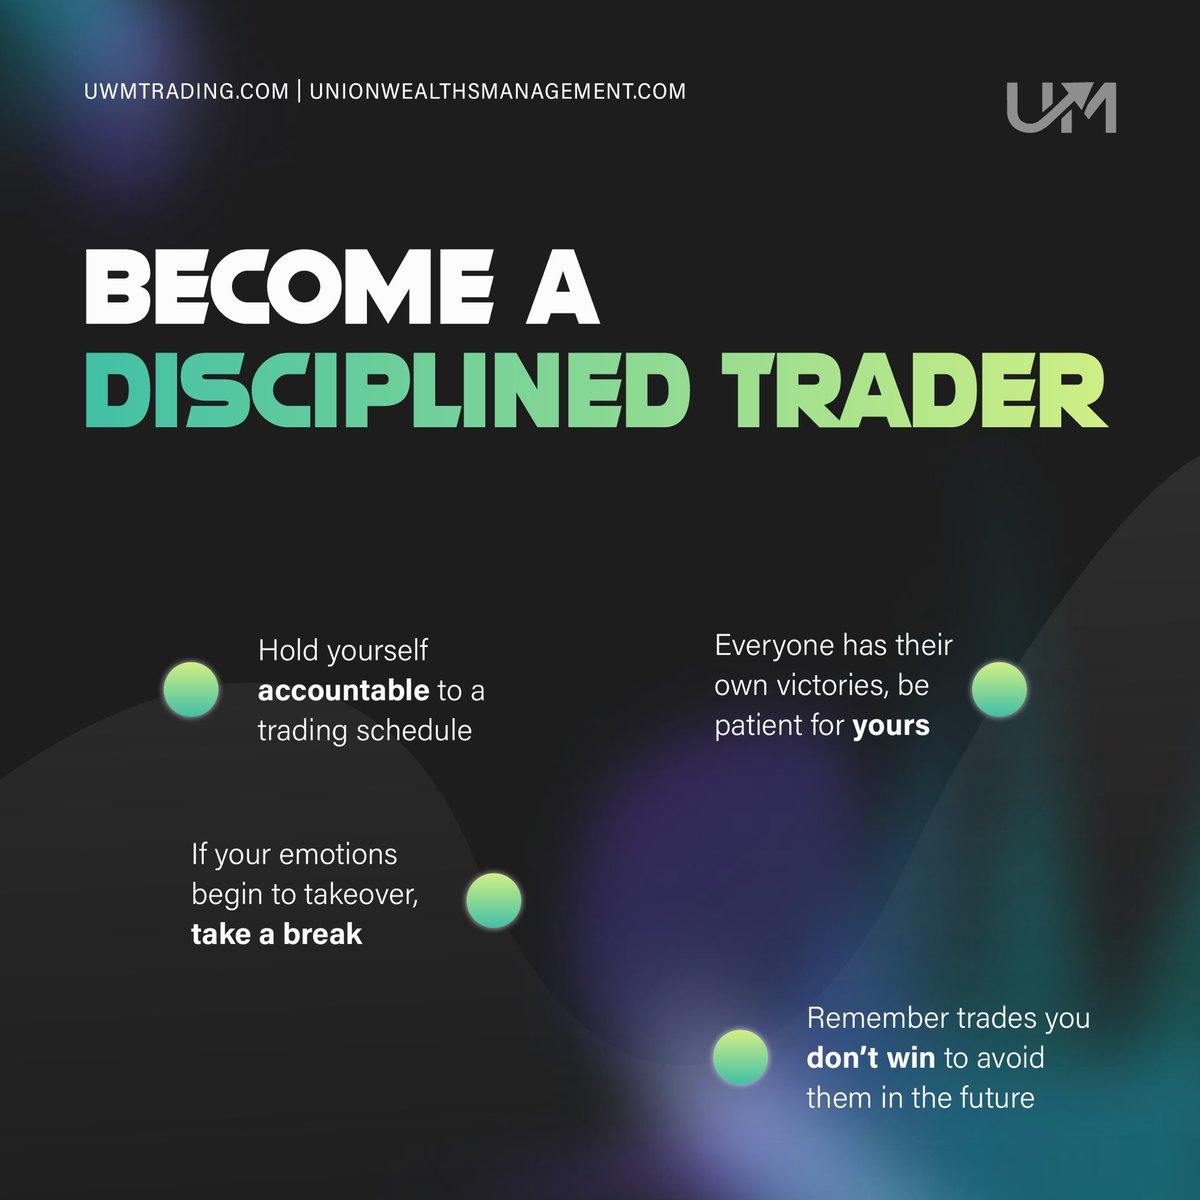 Become a disciplined trader Happy Monday UWM Traders 💚 uwmtrading.com